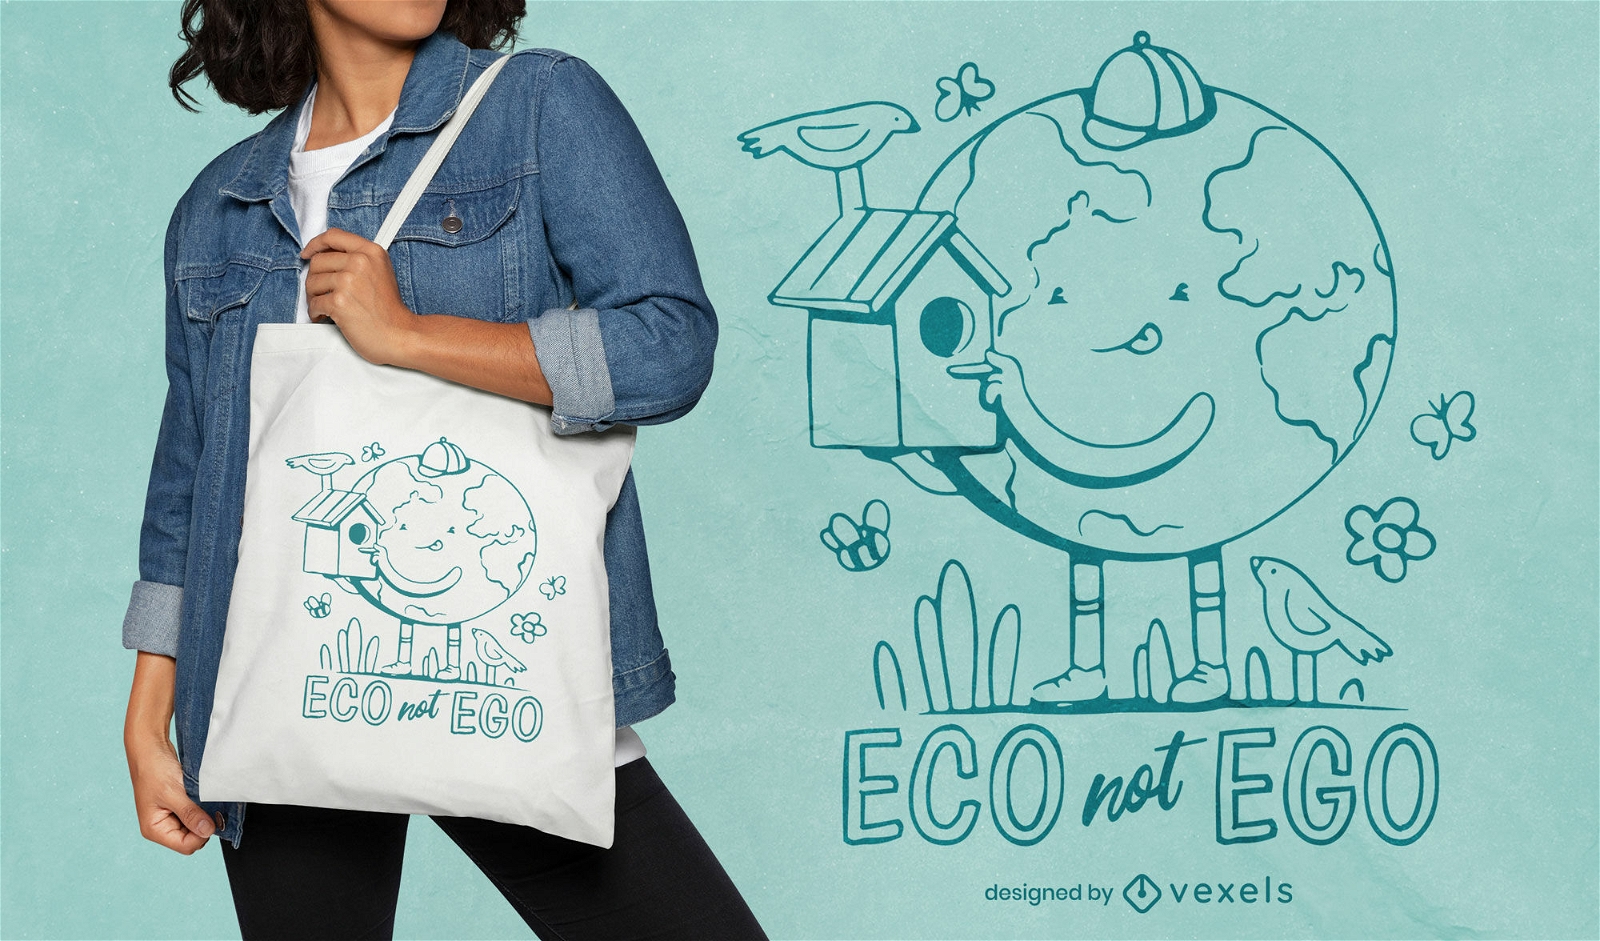 Ecology Earth day tote bag design